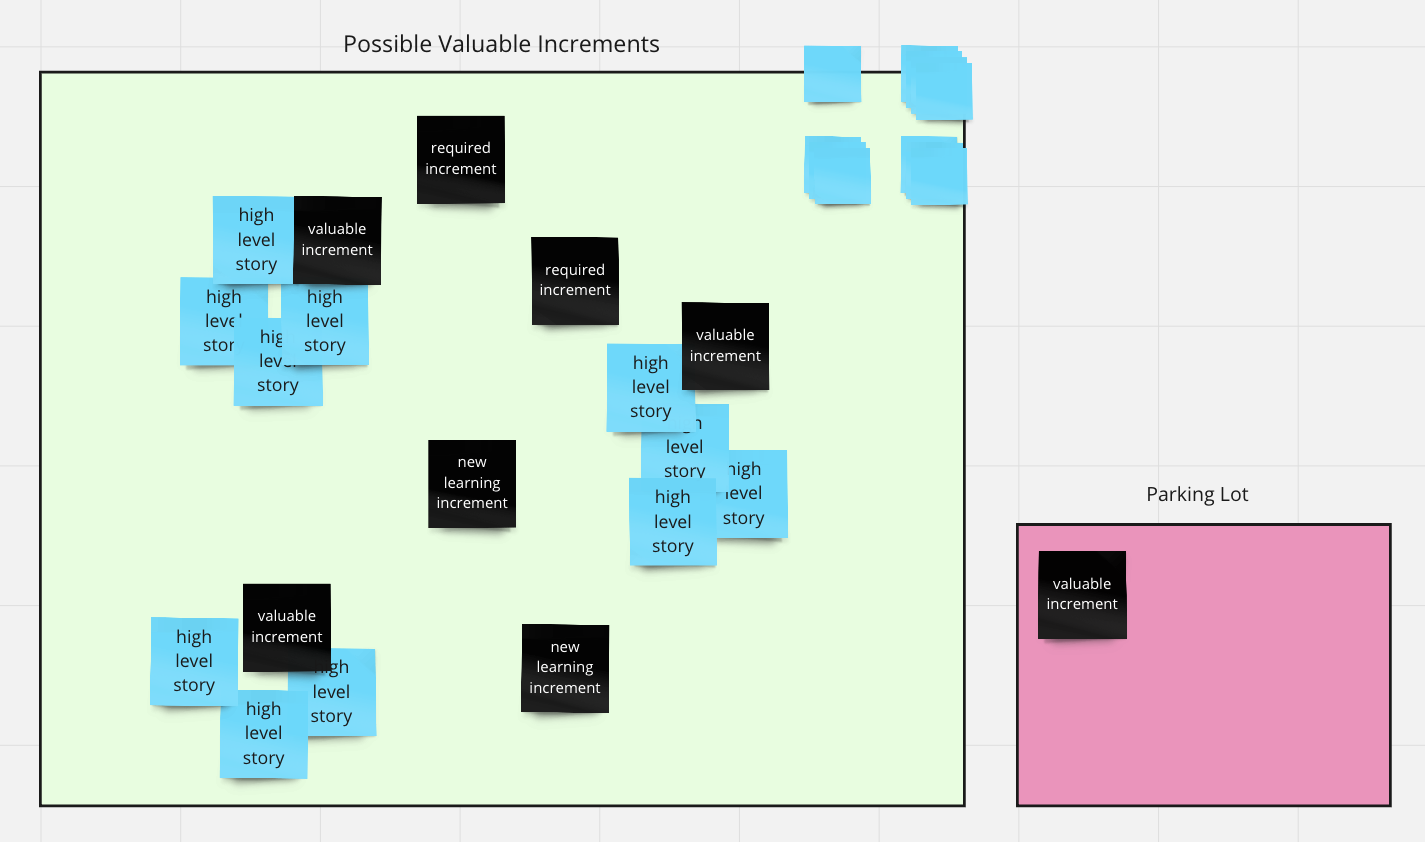 Possible Valuable Increments Organized